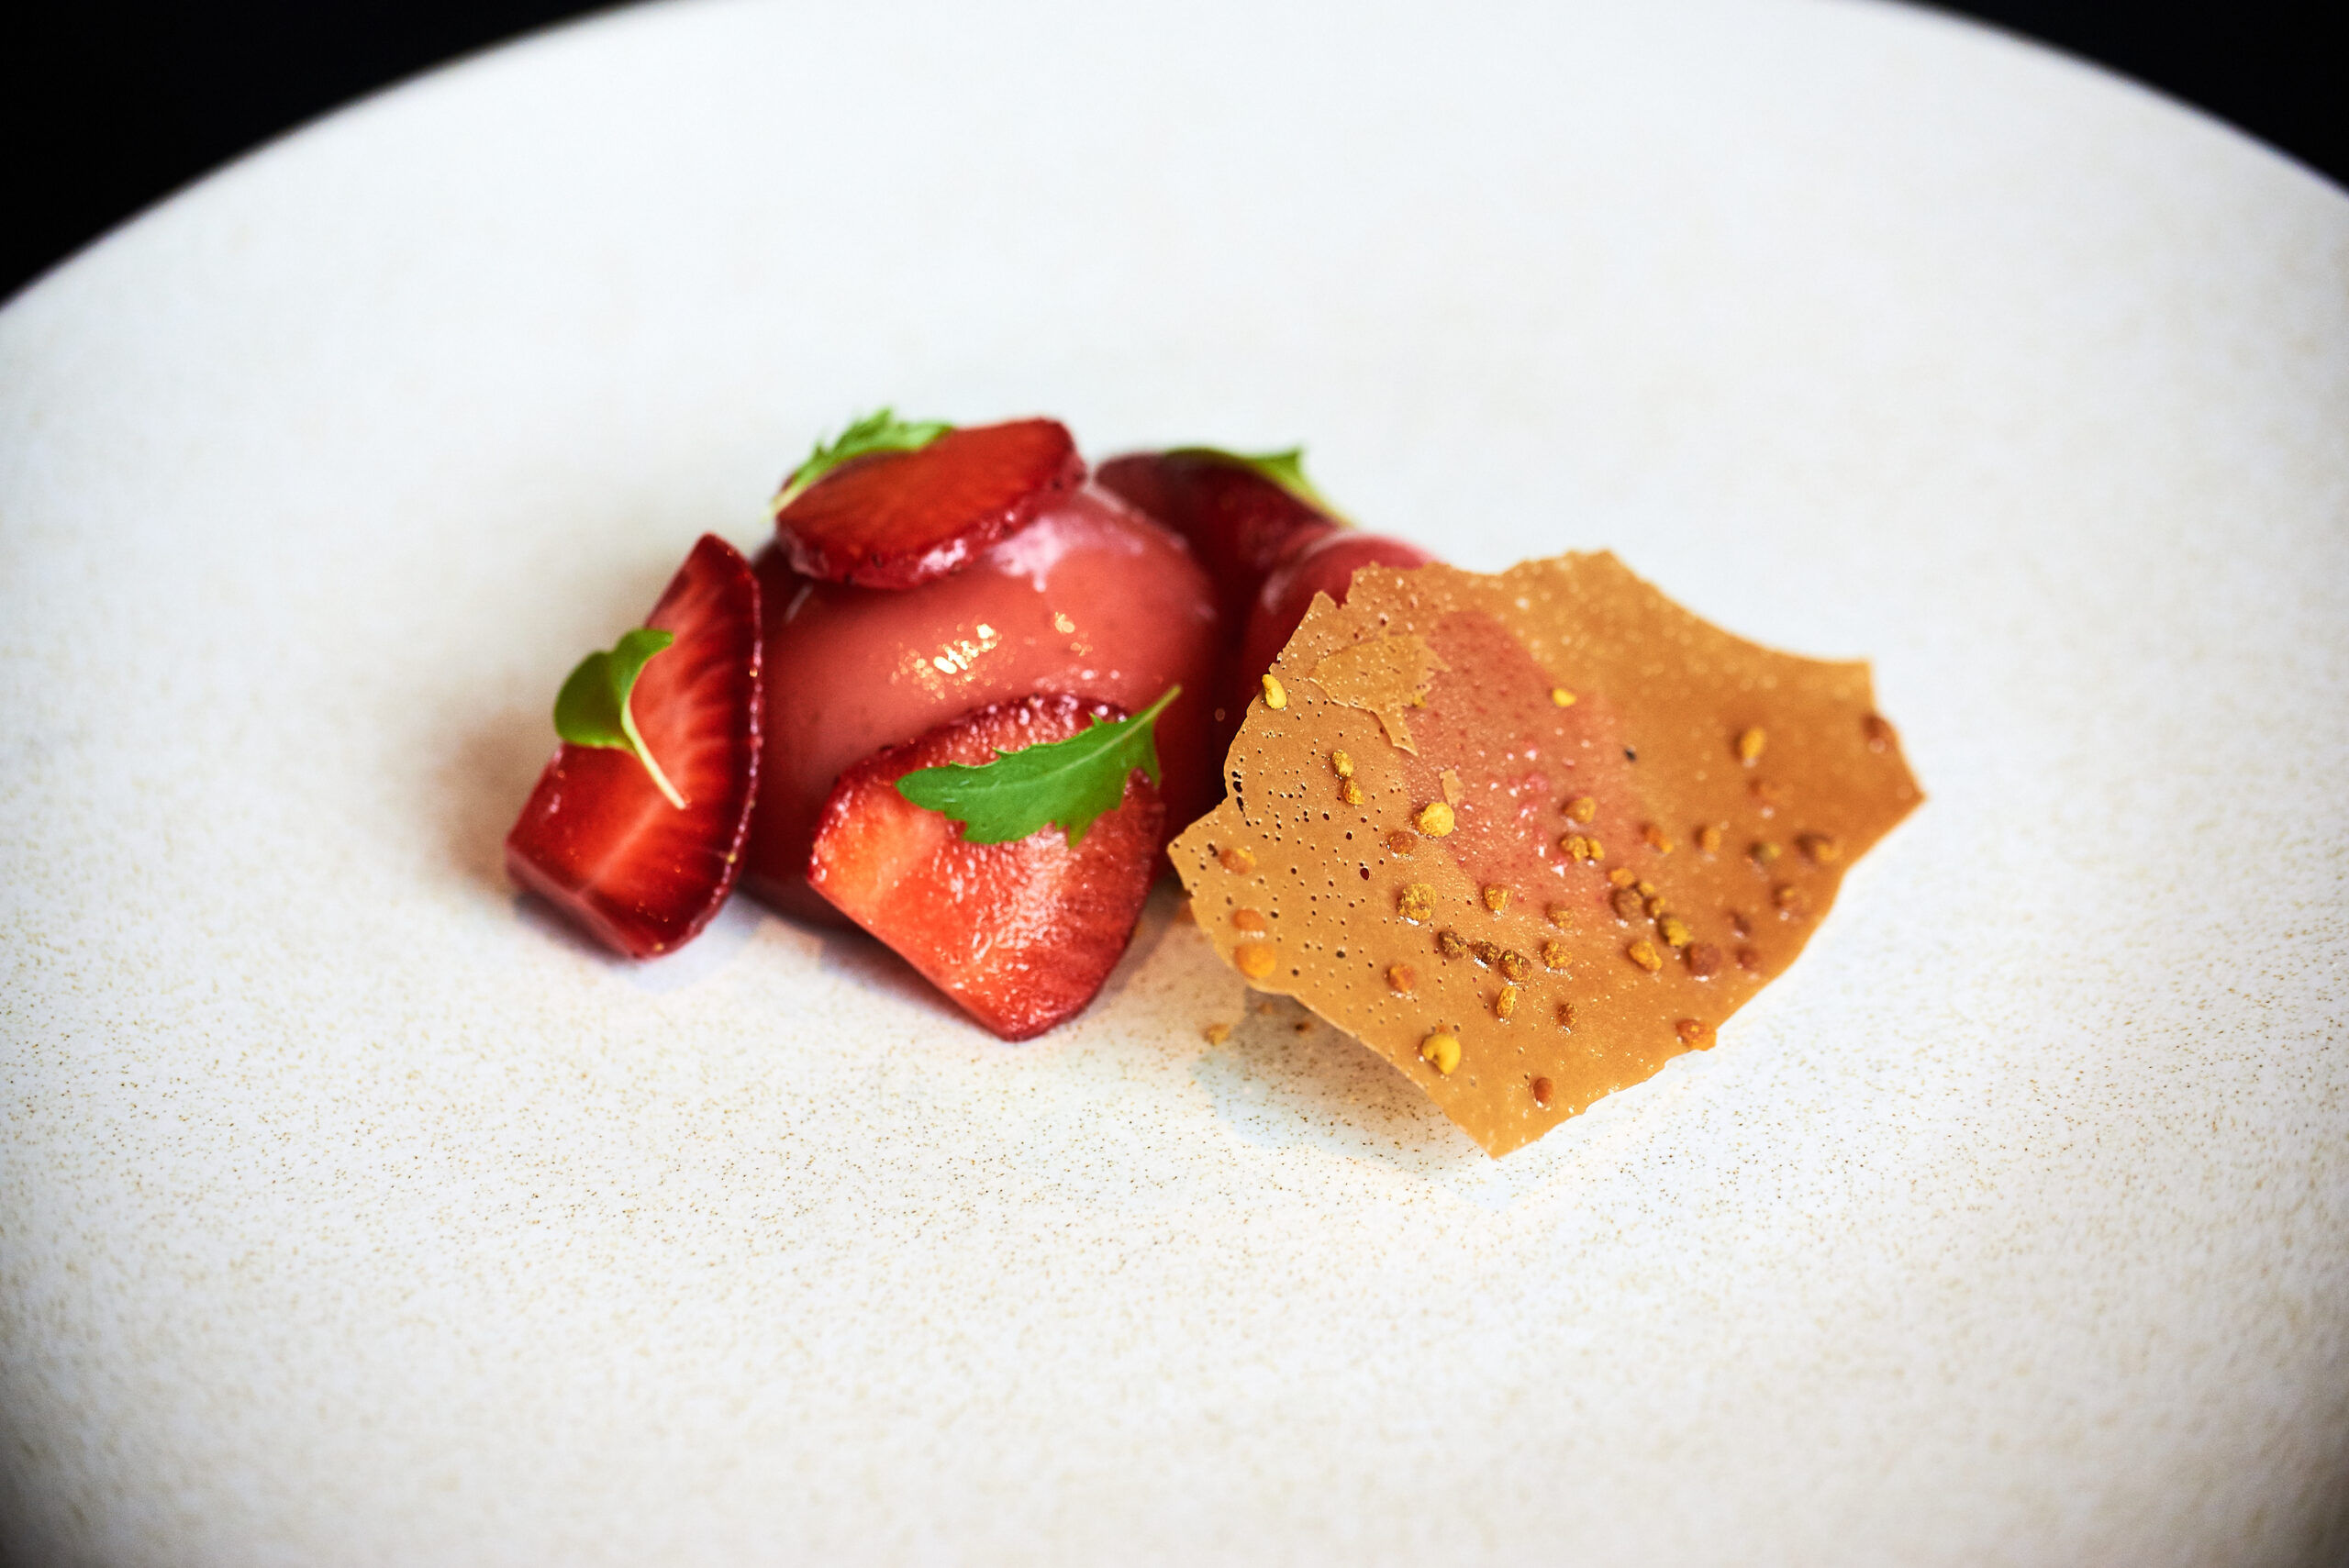 Strawberries, ice cream and scone crumb served at the four-course lunch at etch.